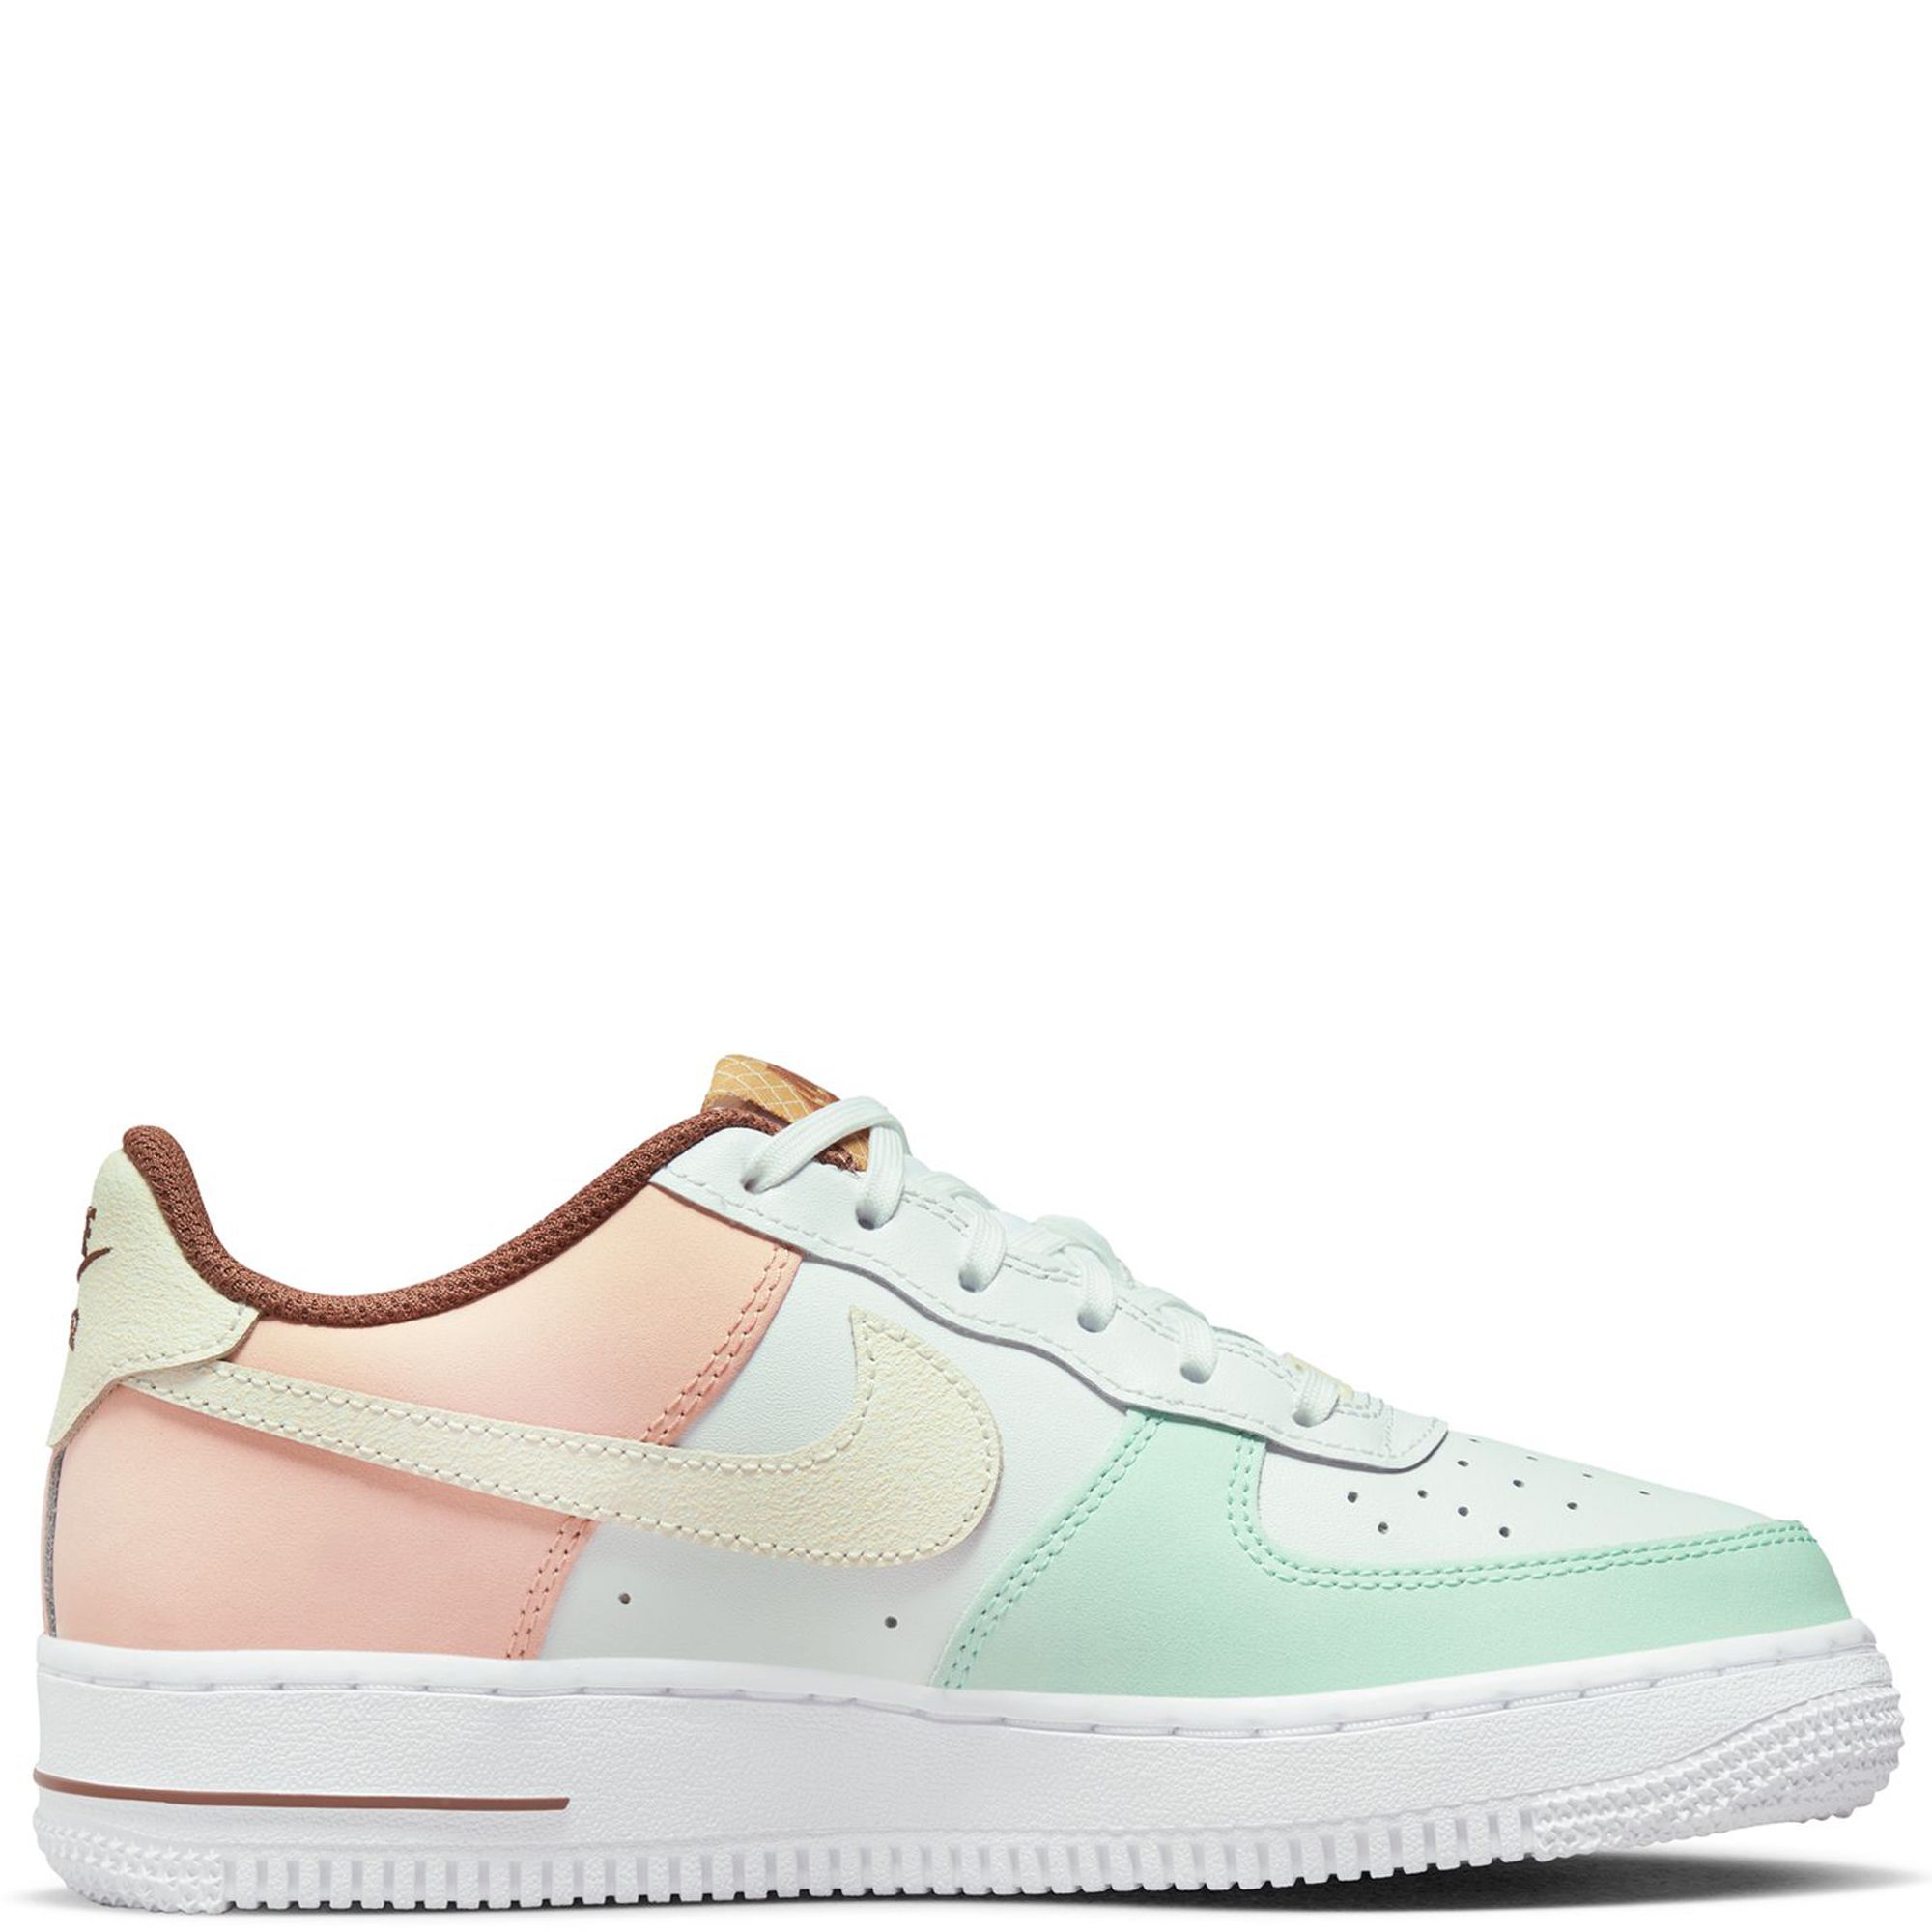 Nike Air Force 1 LV8 GS Confetti DM7597-100, Size 7Y, Women's Size 9 in  2023